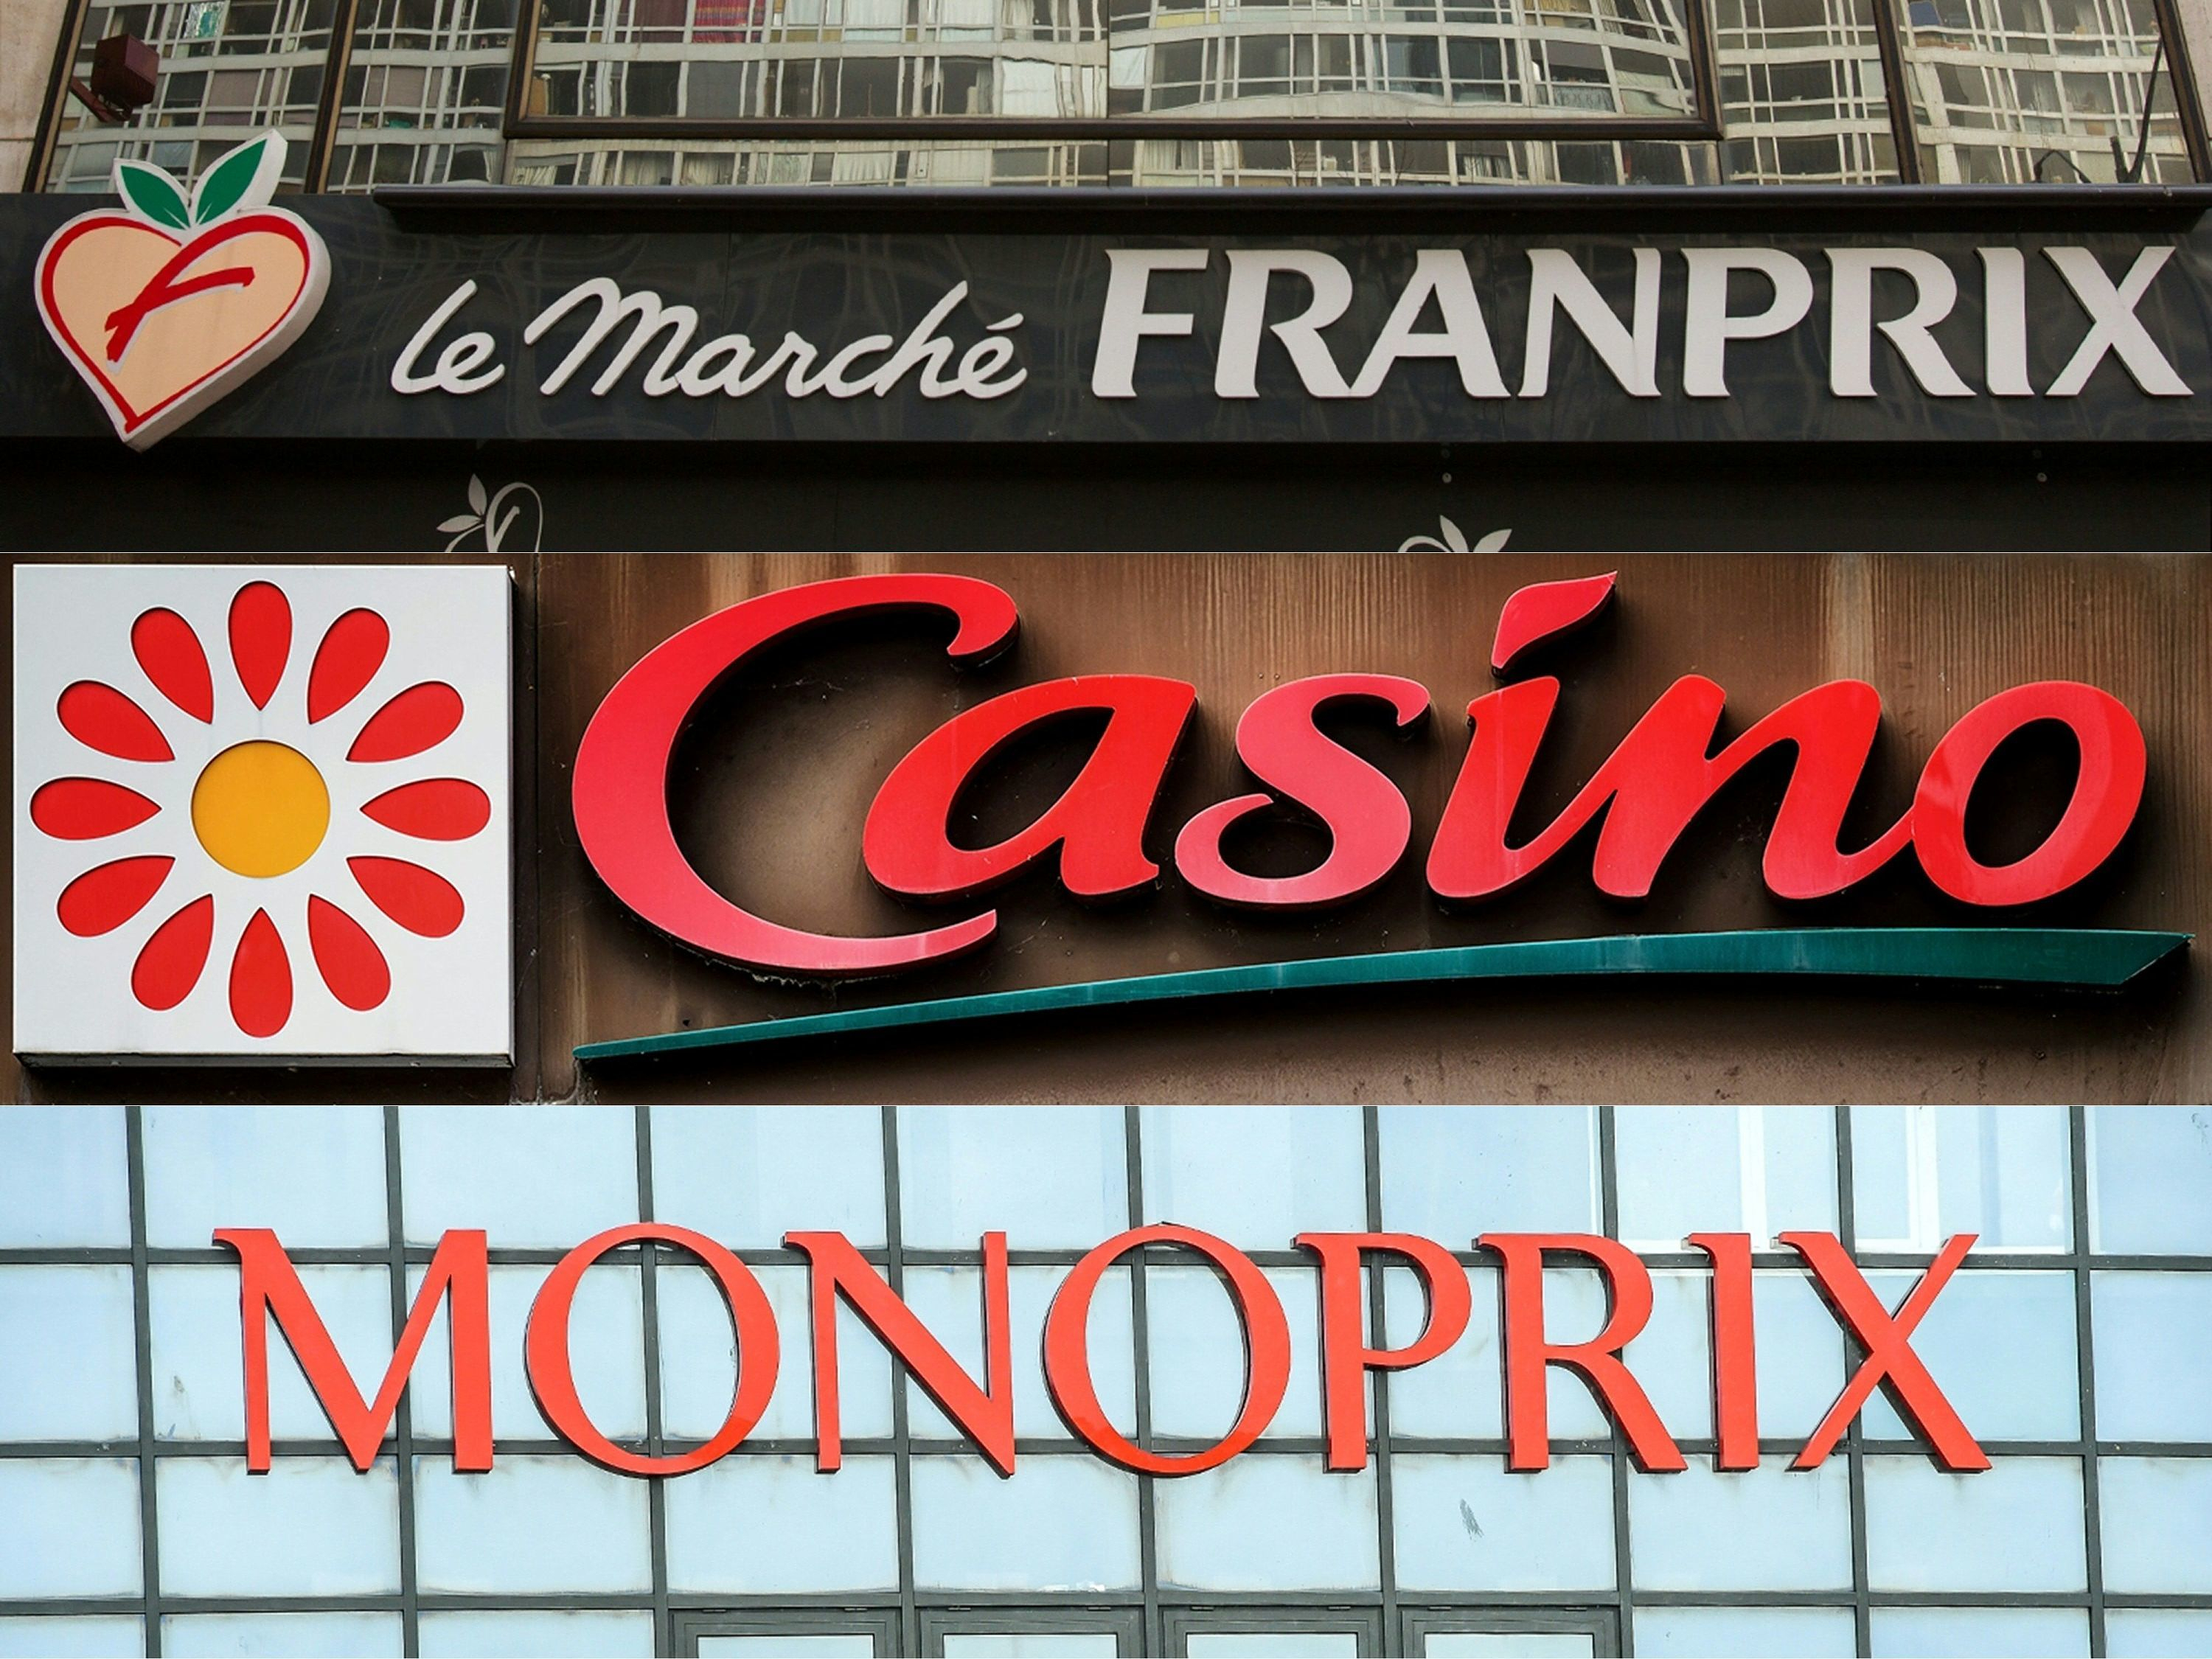 The Casino group could cut more than 3,000 positions